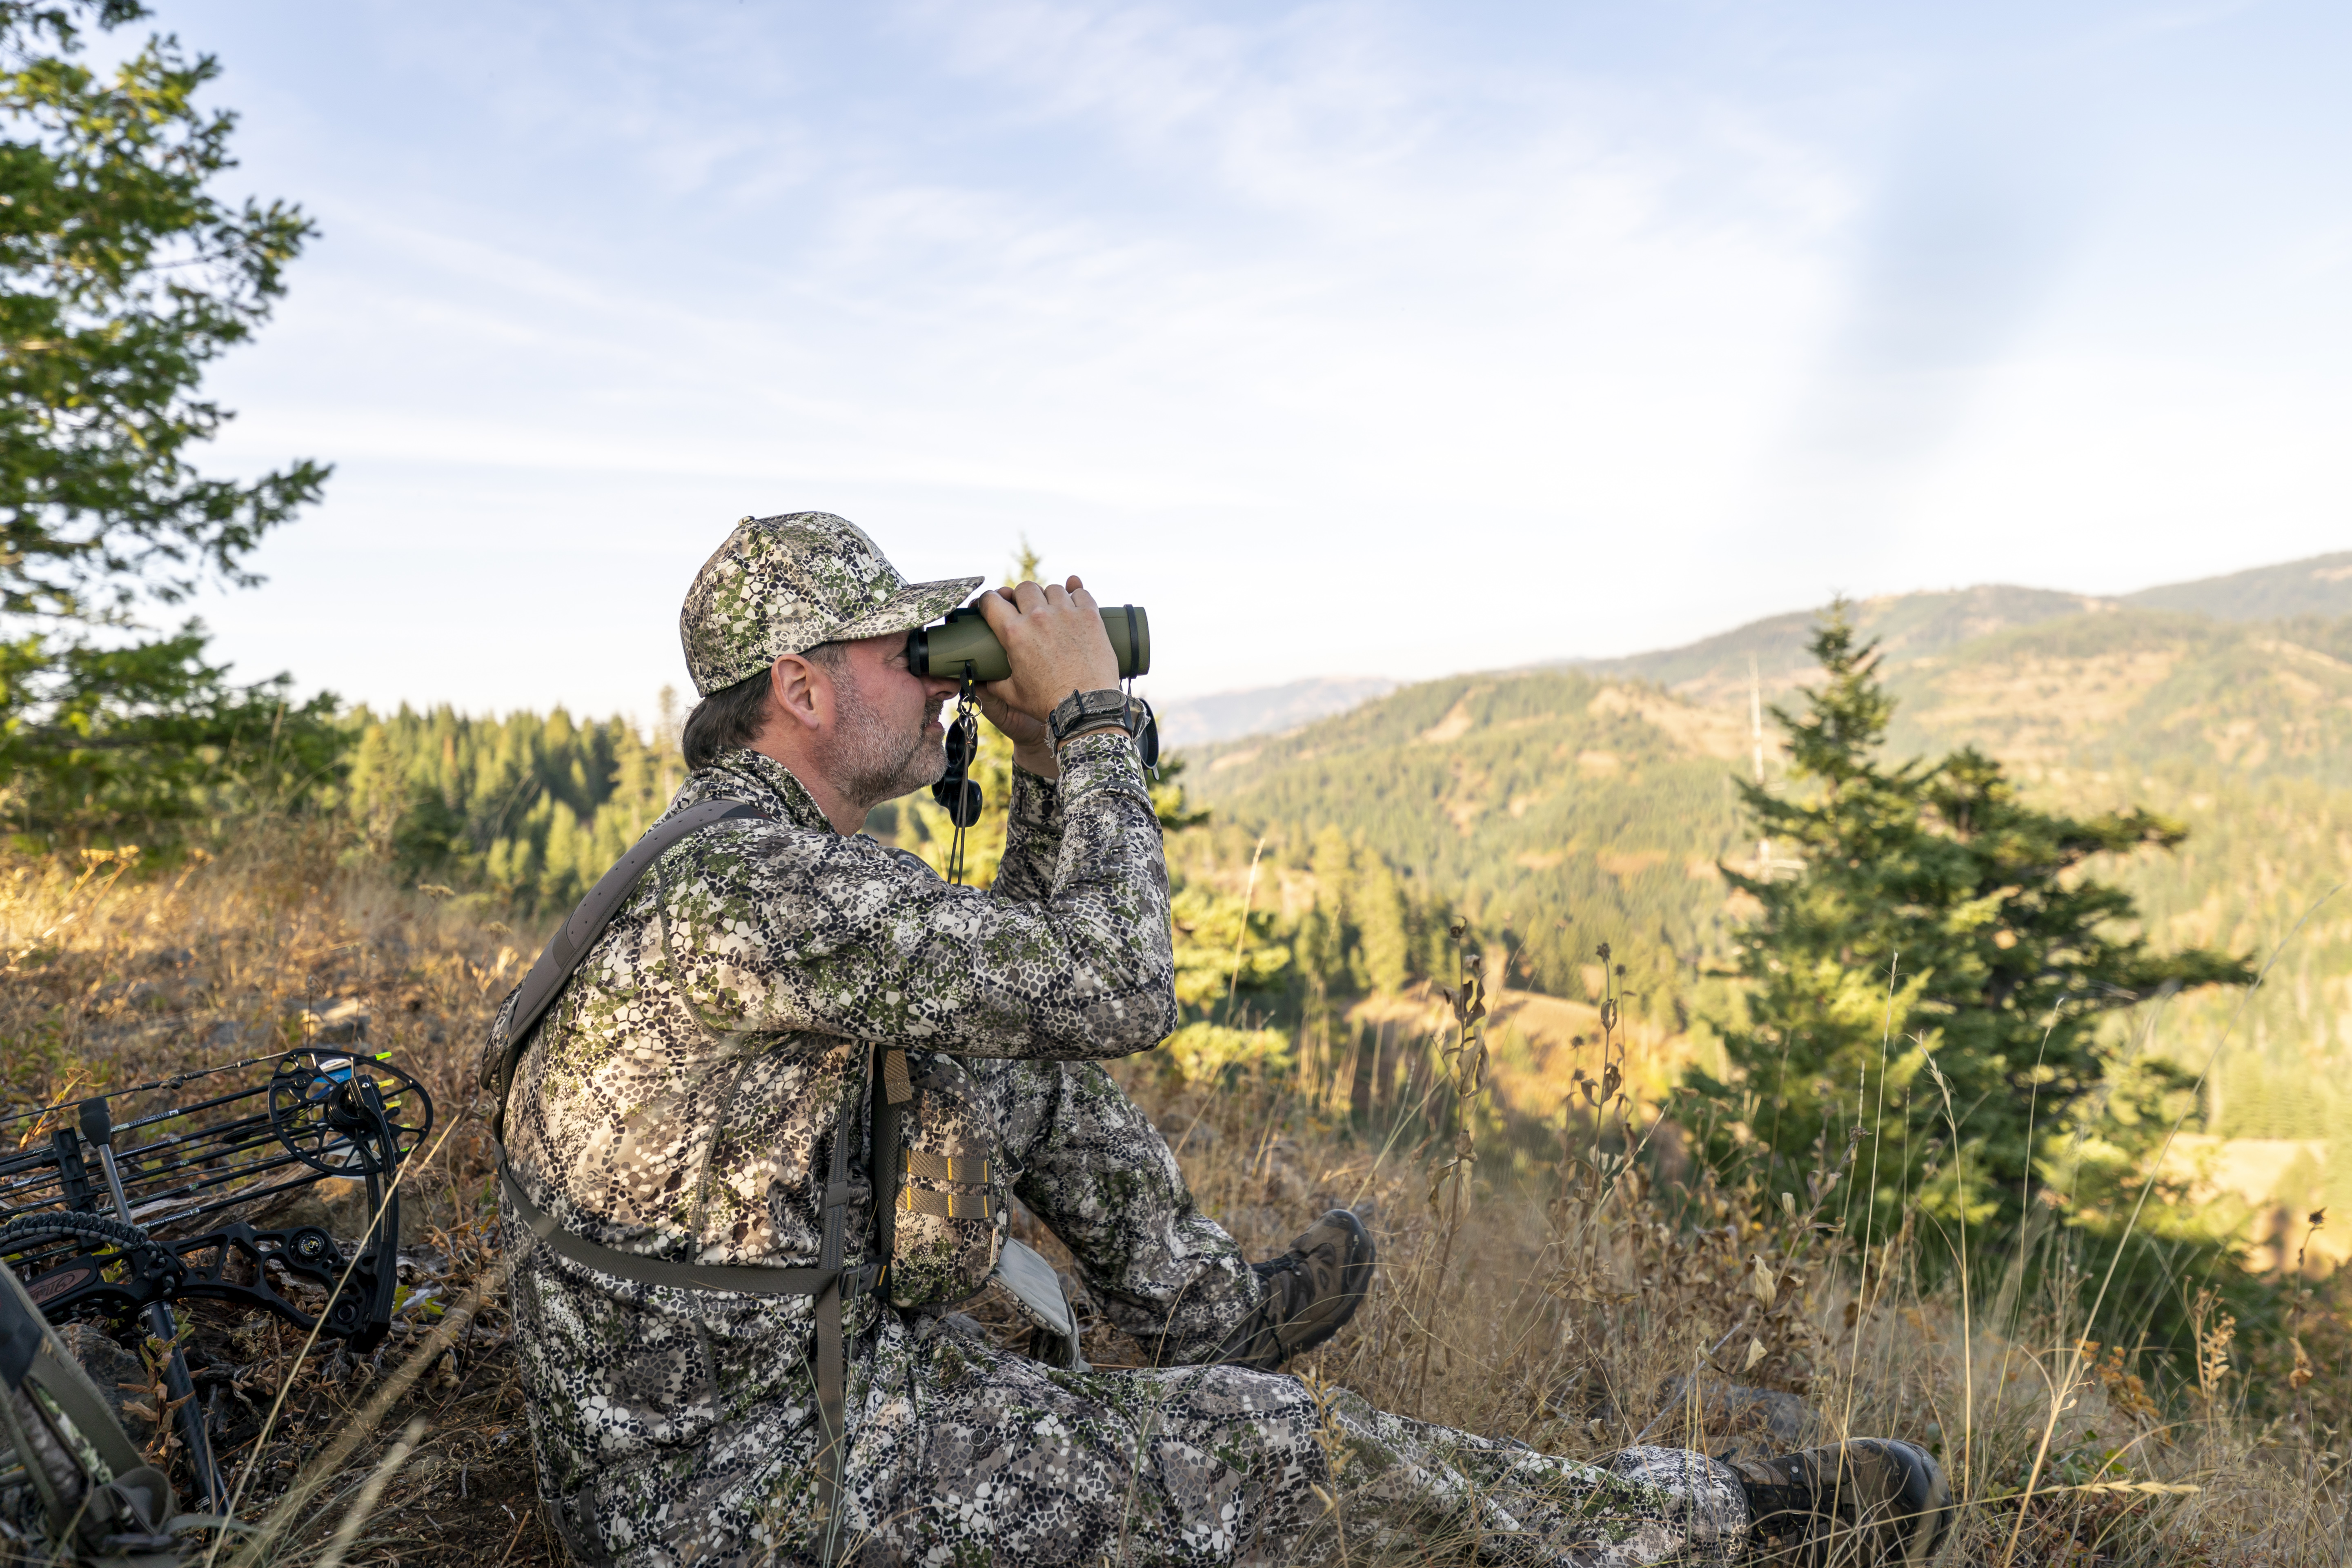 A bowhunter sits on a mountain peak and looks through binoculars while tracking wild game in the forested wilderness of Washington State. A crossbow is lying on the ground behind the man.